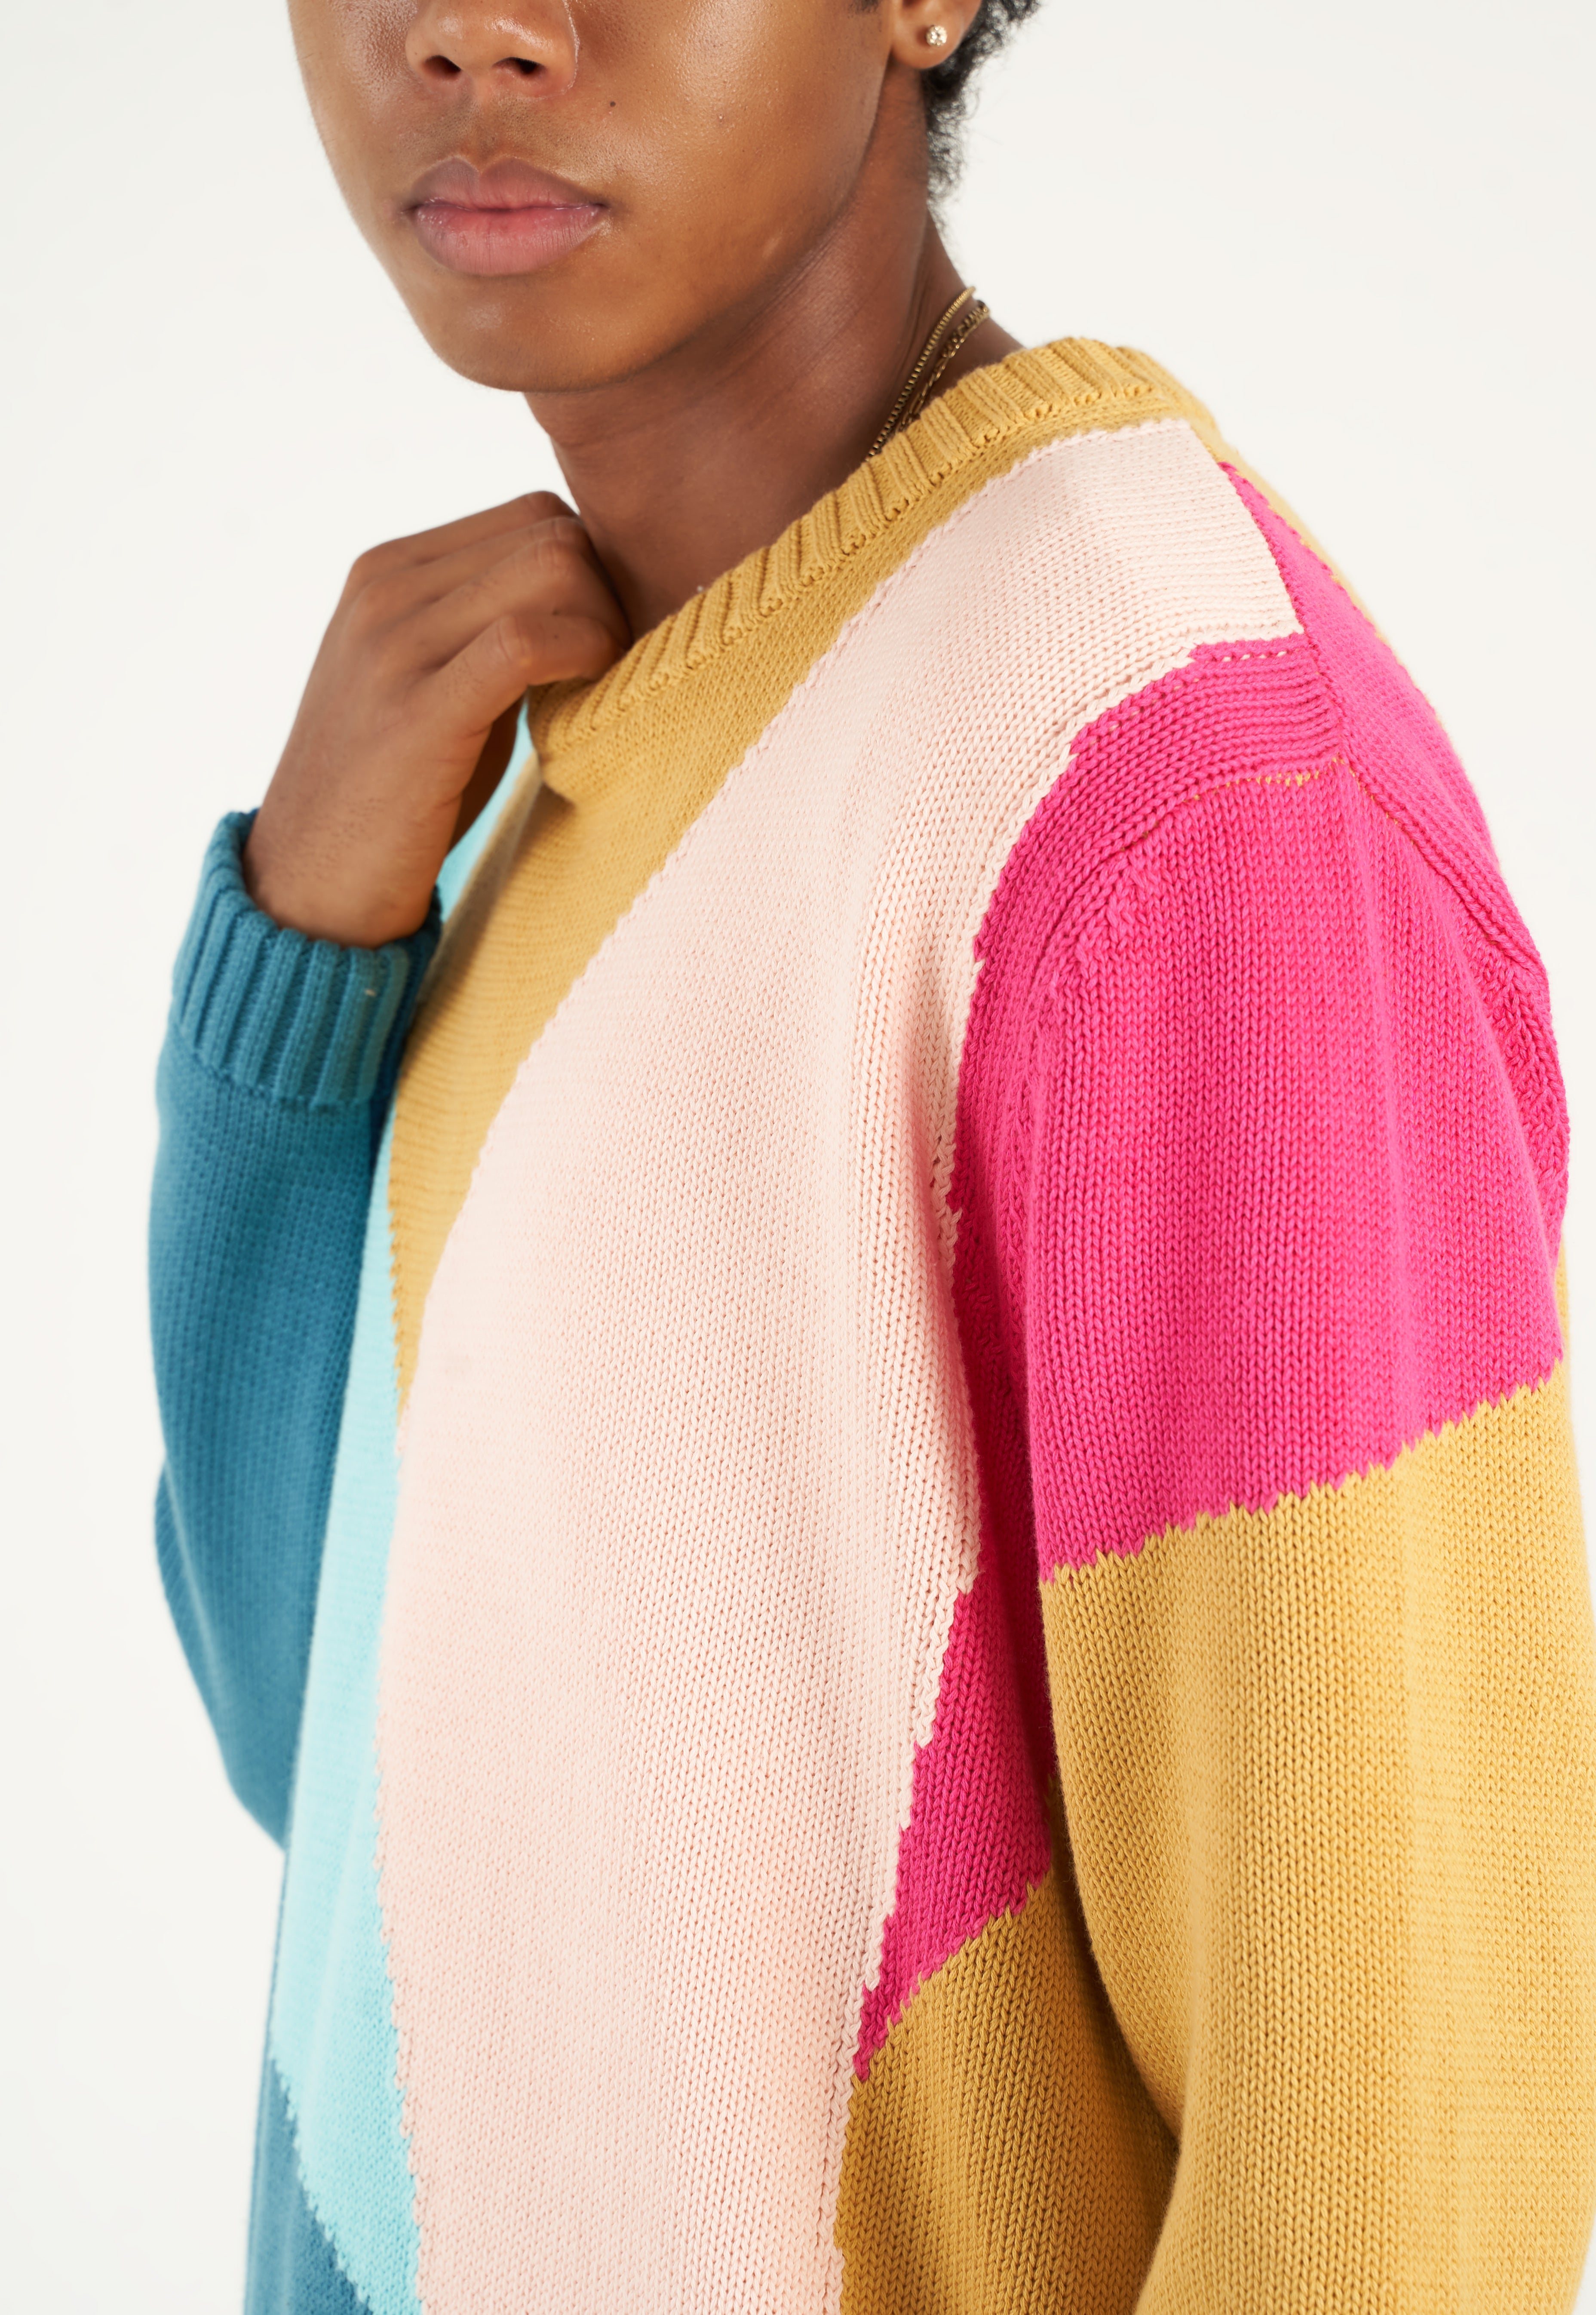 Layered Terrain Knitted Crewneck